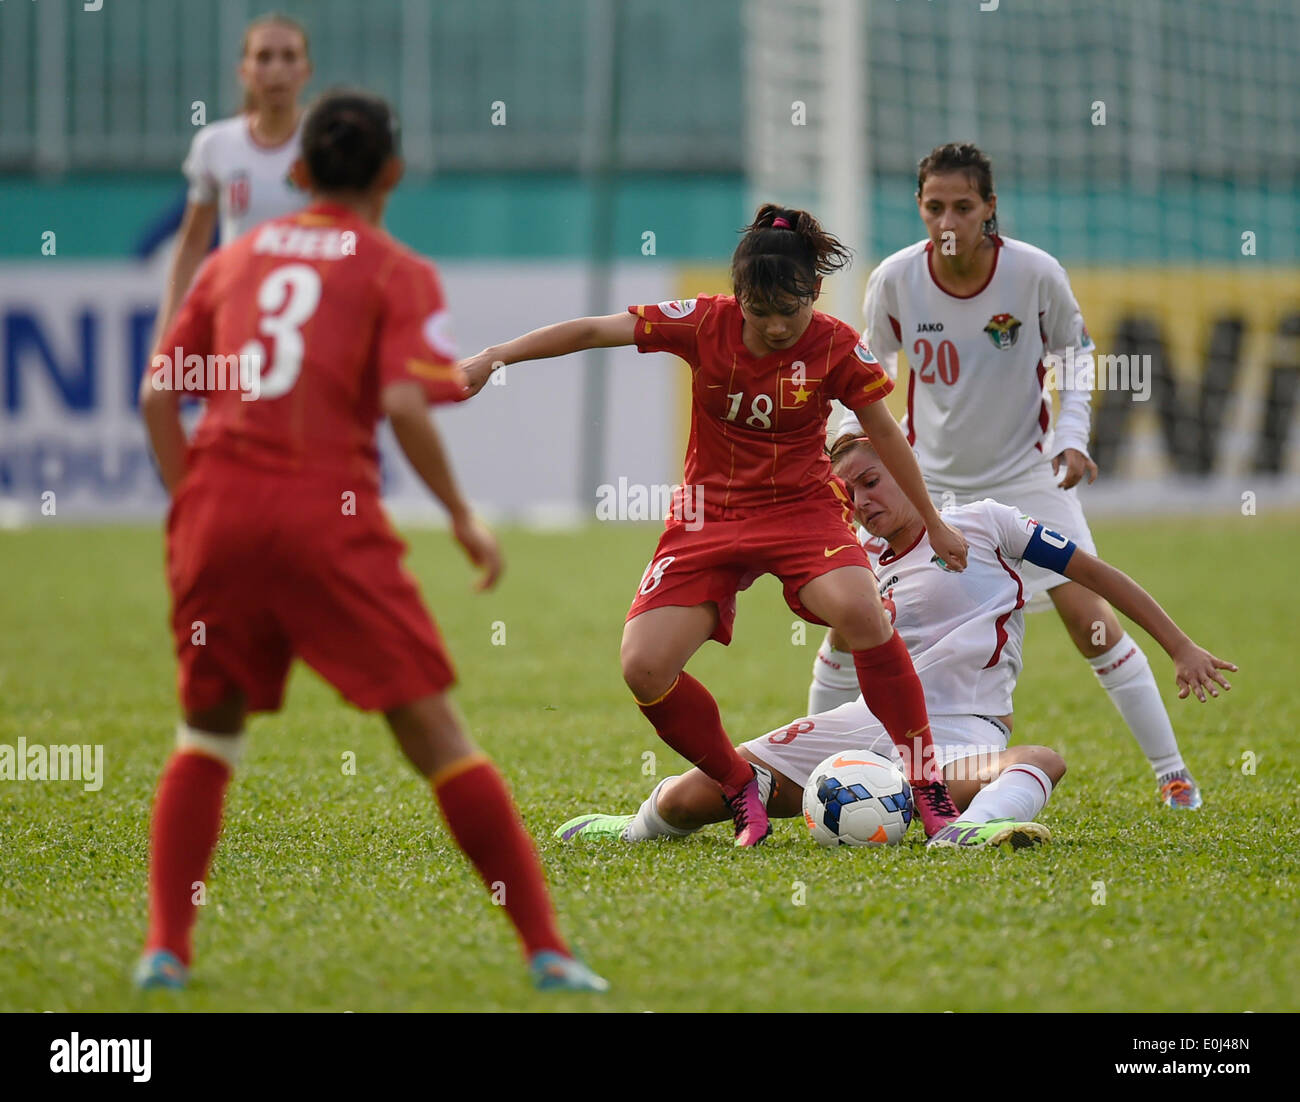 Ho Chi Minh City, Vietnam. 14th May, 2014. Vietnam's Nguyen Thi Lieu (3rd R) vies for the ball during the Group A match against Jordan at the 2014 AFC Women's Asian Cup held at Thong Nhat Stadium in Ho Chi Minh city, Vietnam, May 14, 2014. Vietnam beat Jordan 3-1. © He Jingjia/Xinhua/Alamy Live News Stock Photo